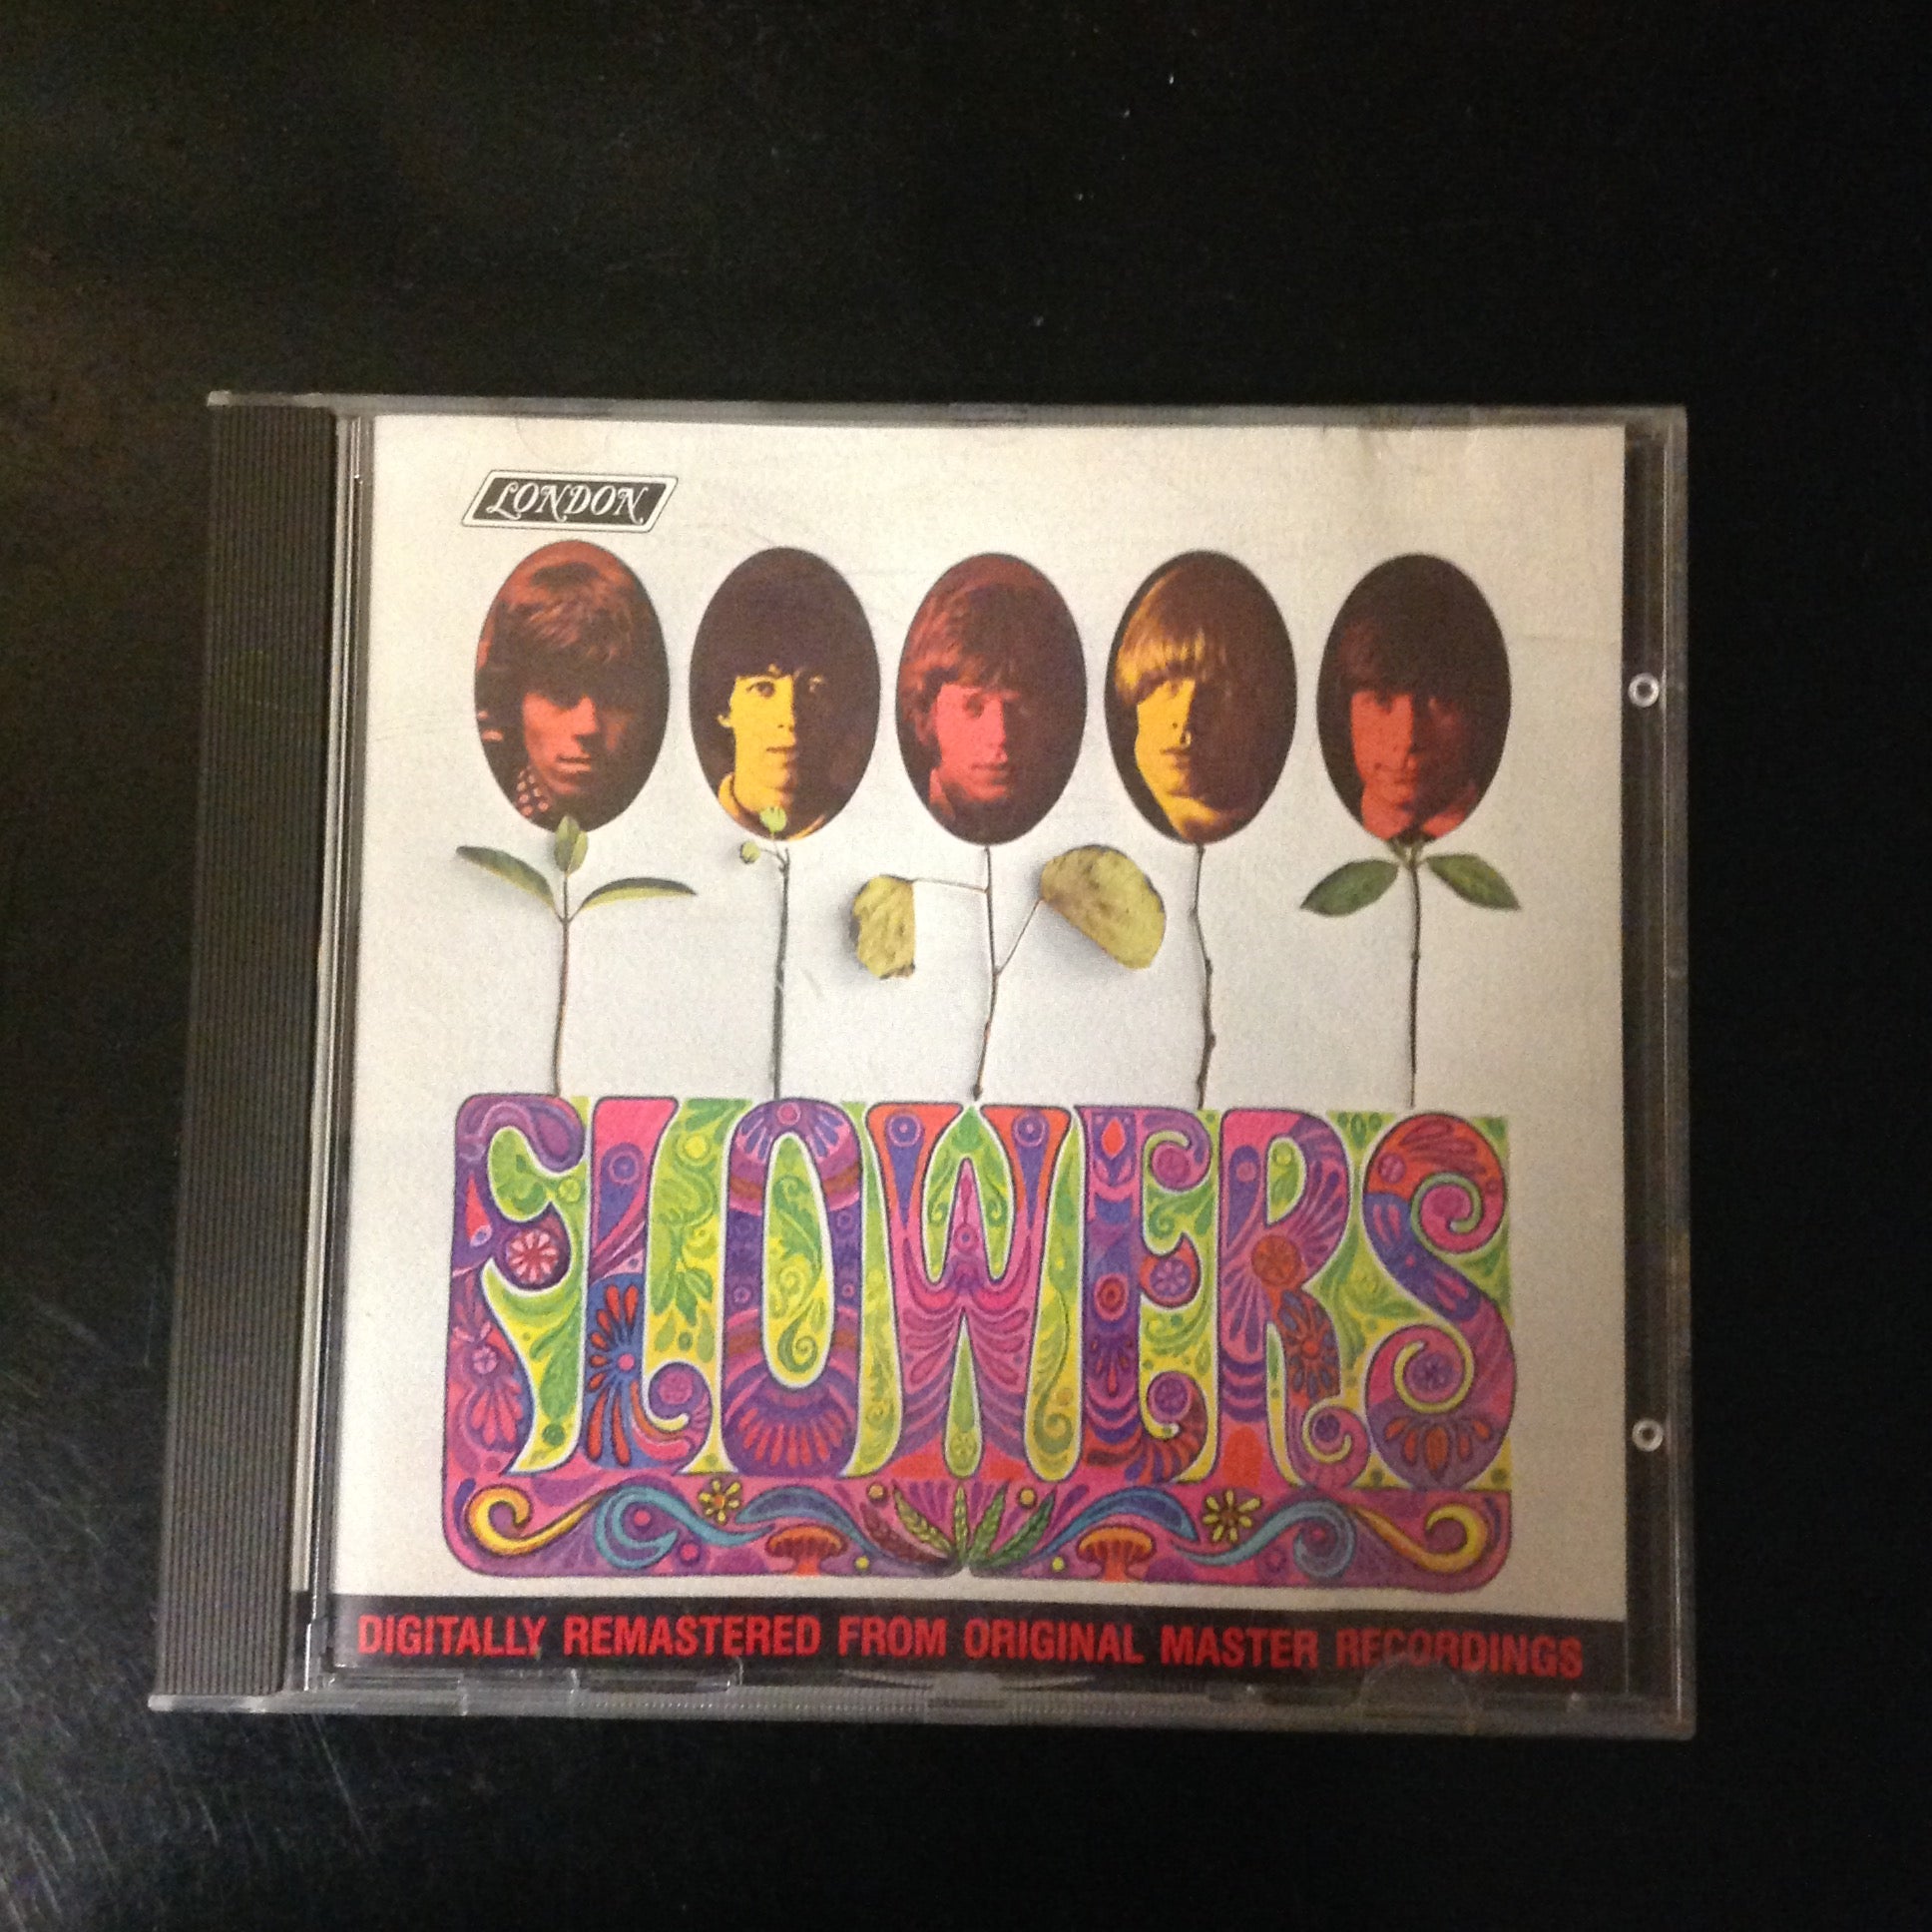 CD The Rolling Stones Flowers 75092 Abkco